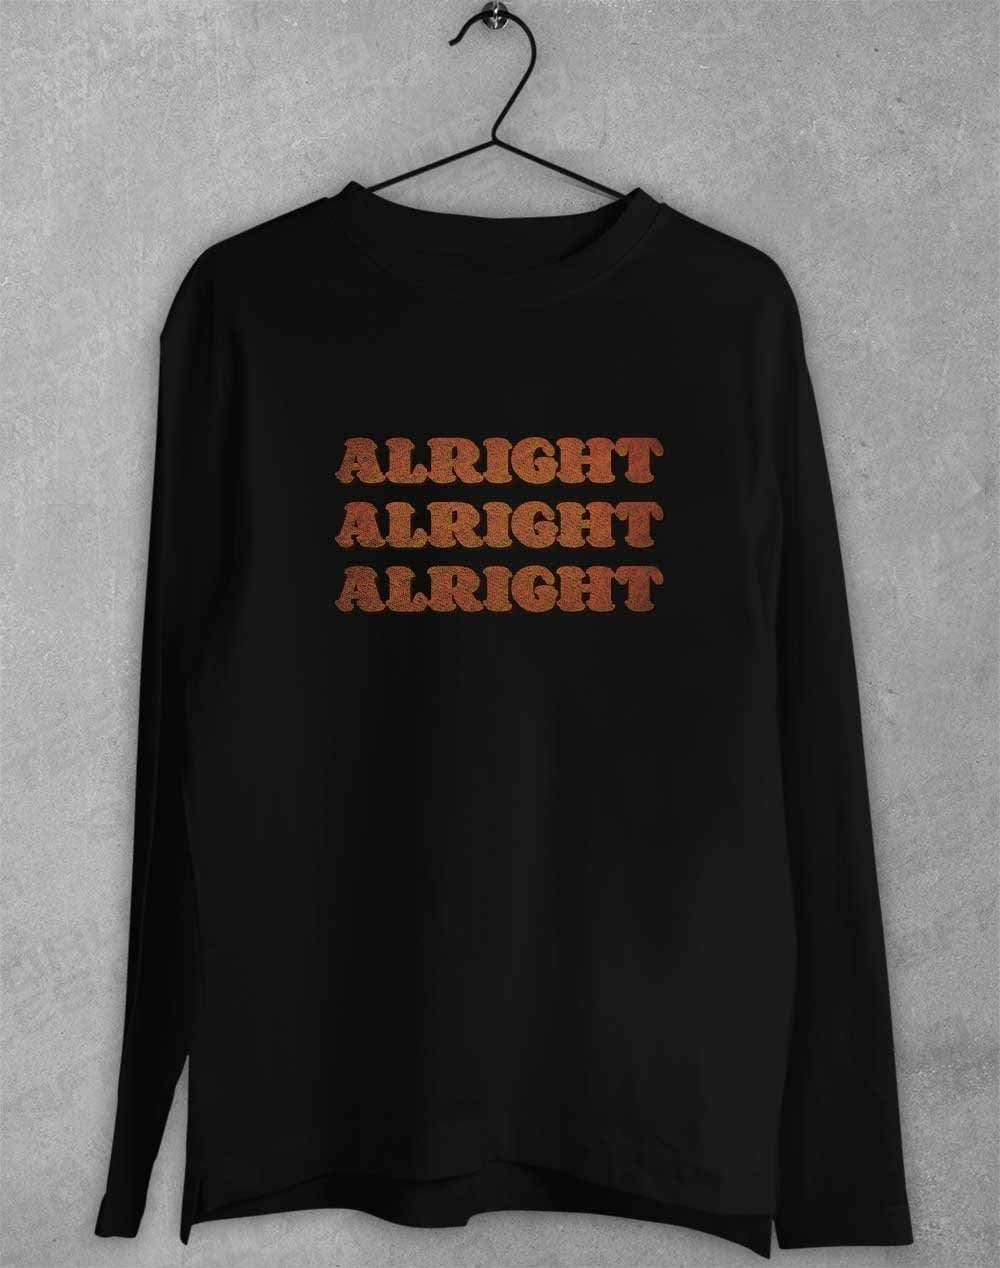 Alright Alright Alright Long Sleeve T-Shirt S / Black  - Off World Tees